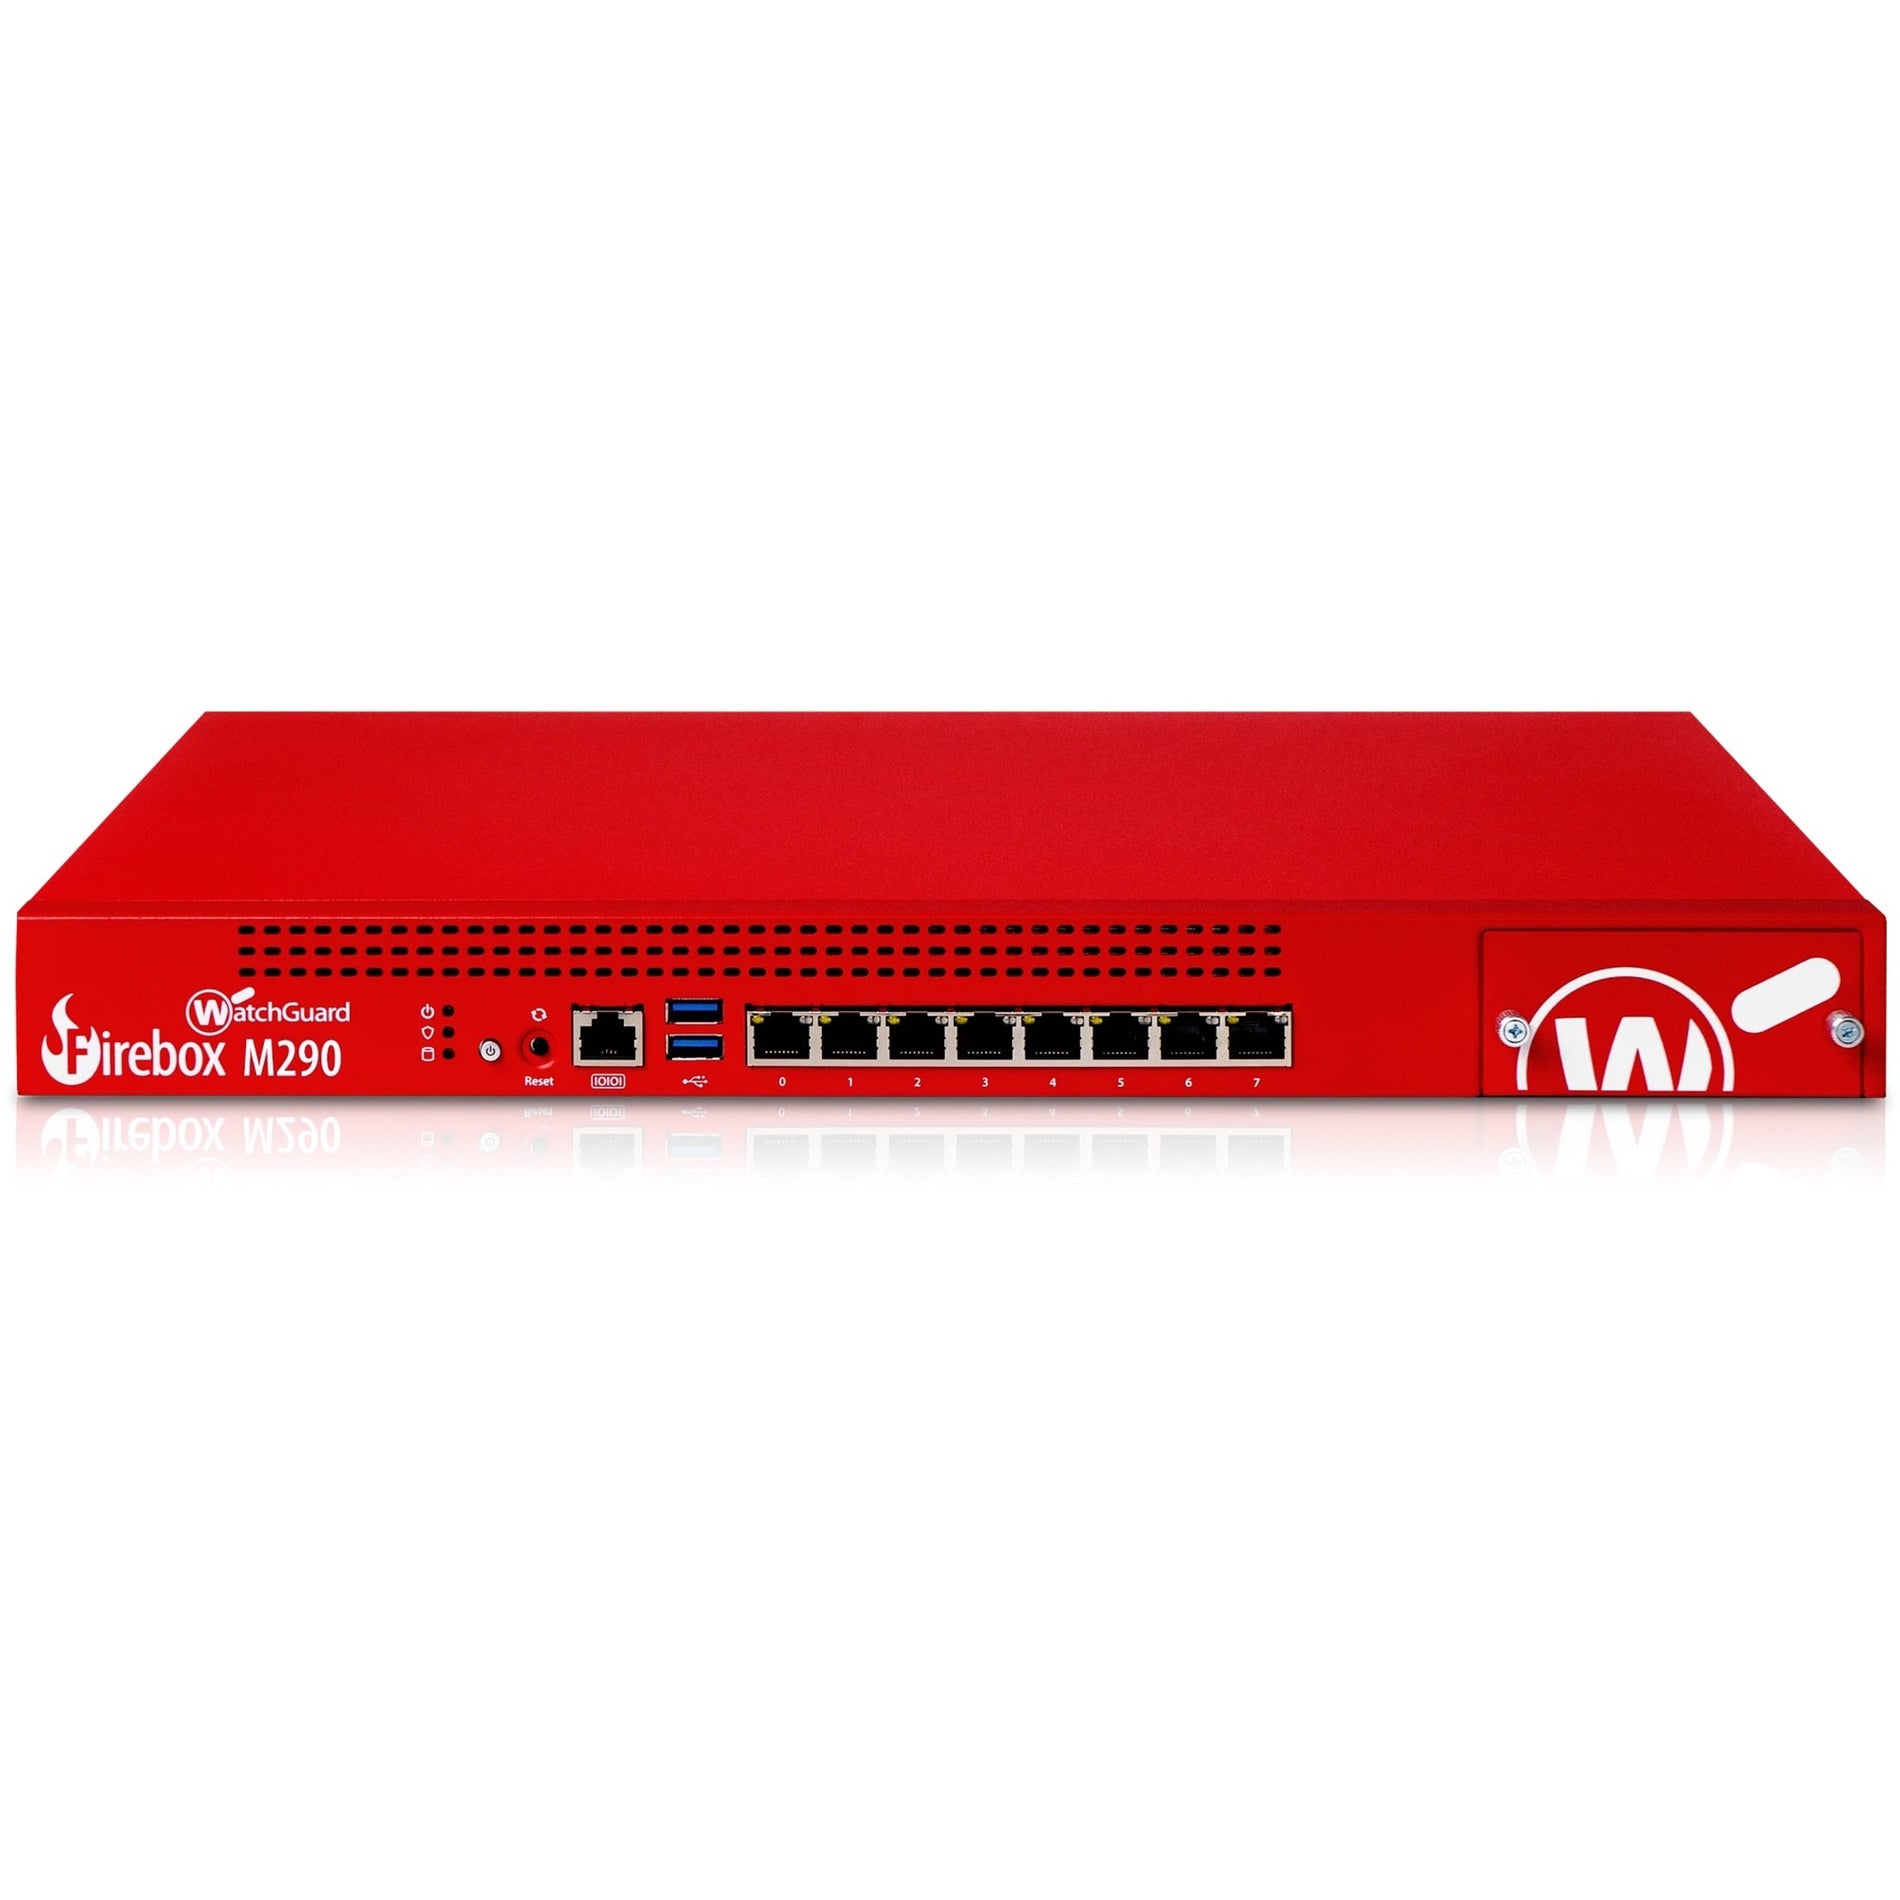 WatchGuard WGM29002103 Firebox M290 Network Security/Firewall Appliance, 8 Ports, 3-Year Total Security Suite